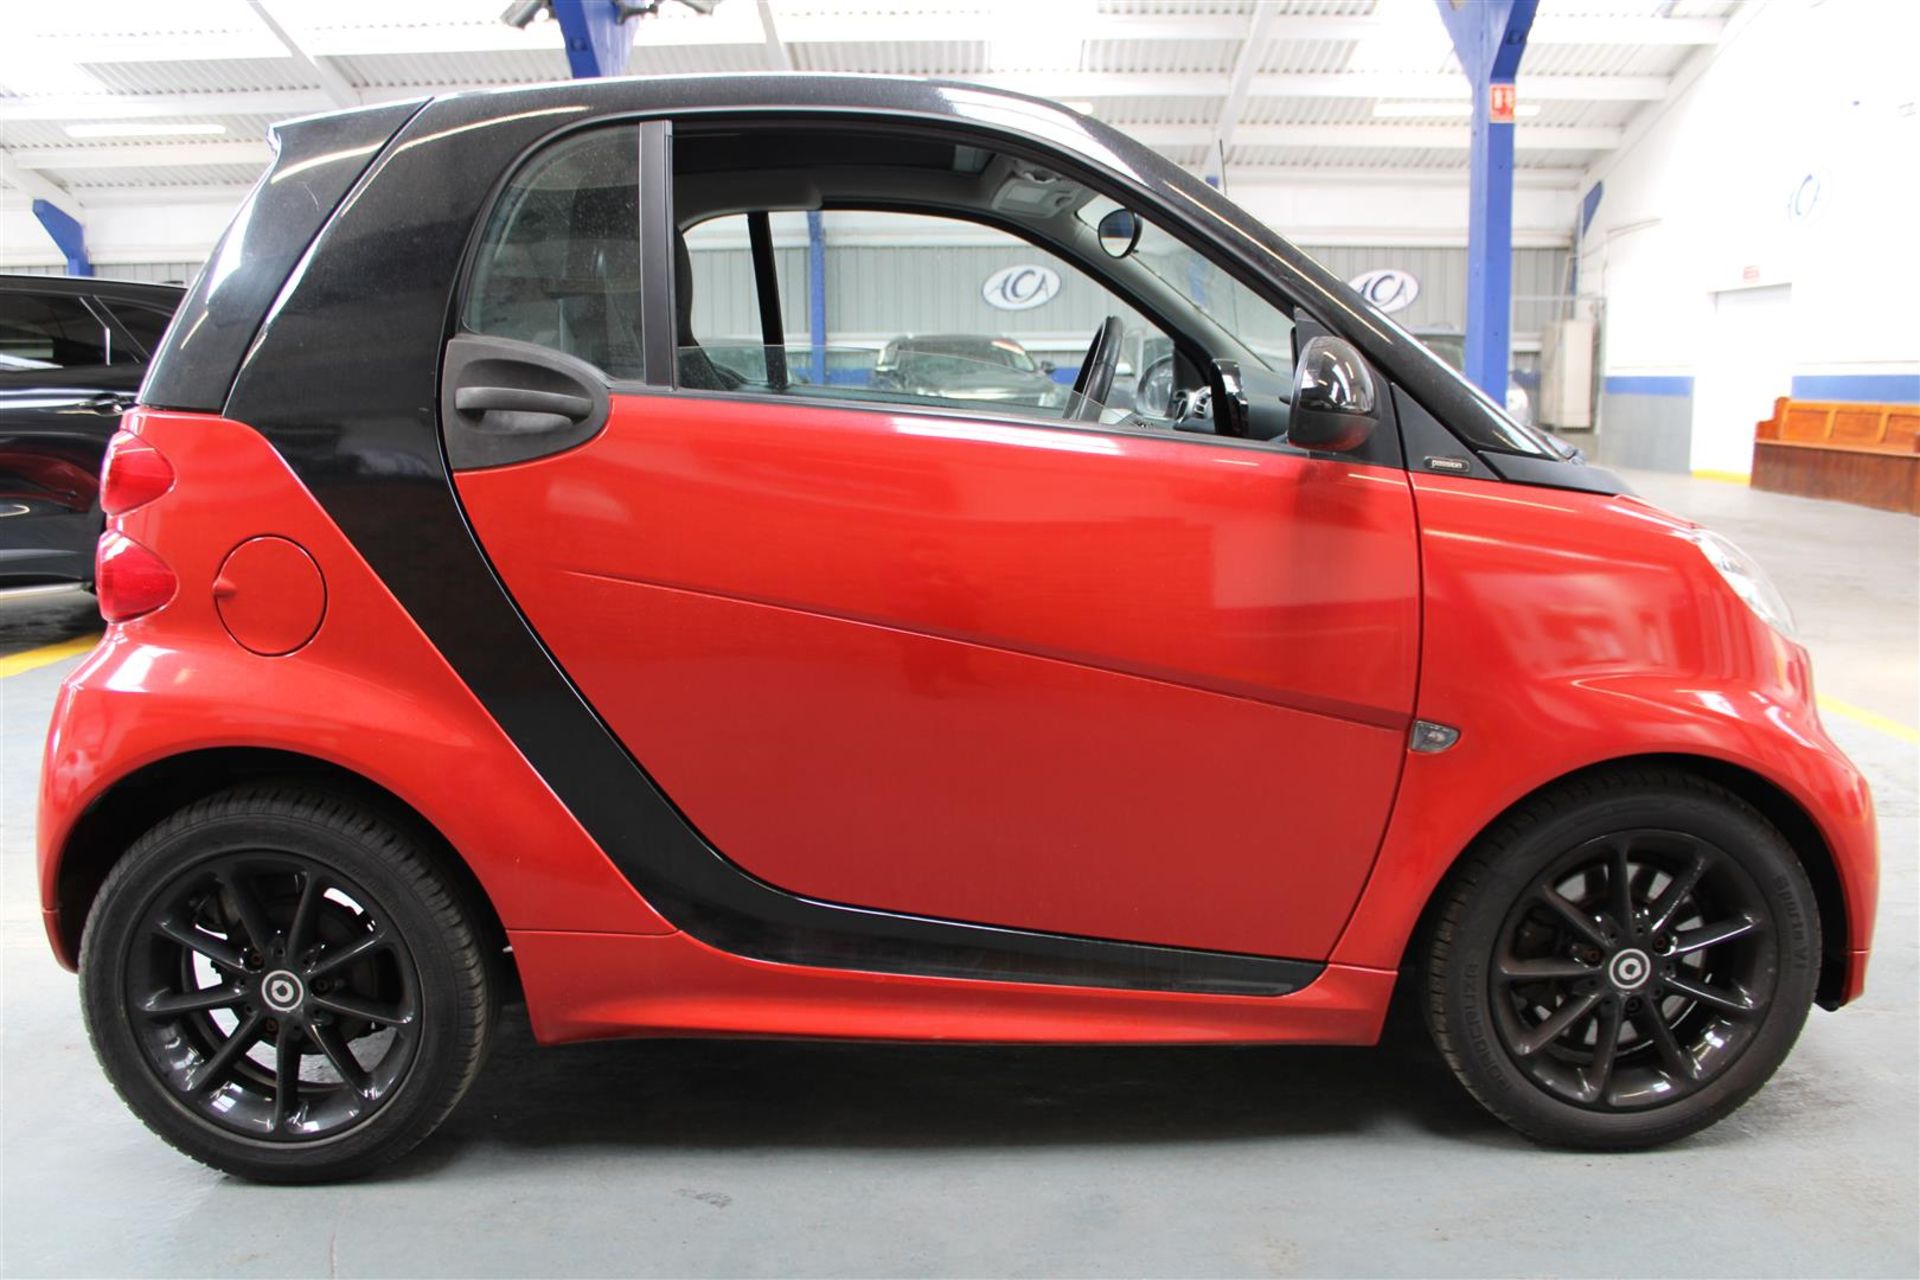 62 12 Smart Fortwo Passion MHD - Image 22 of 27